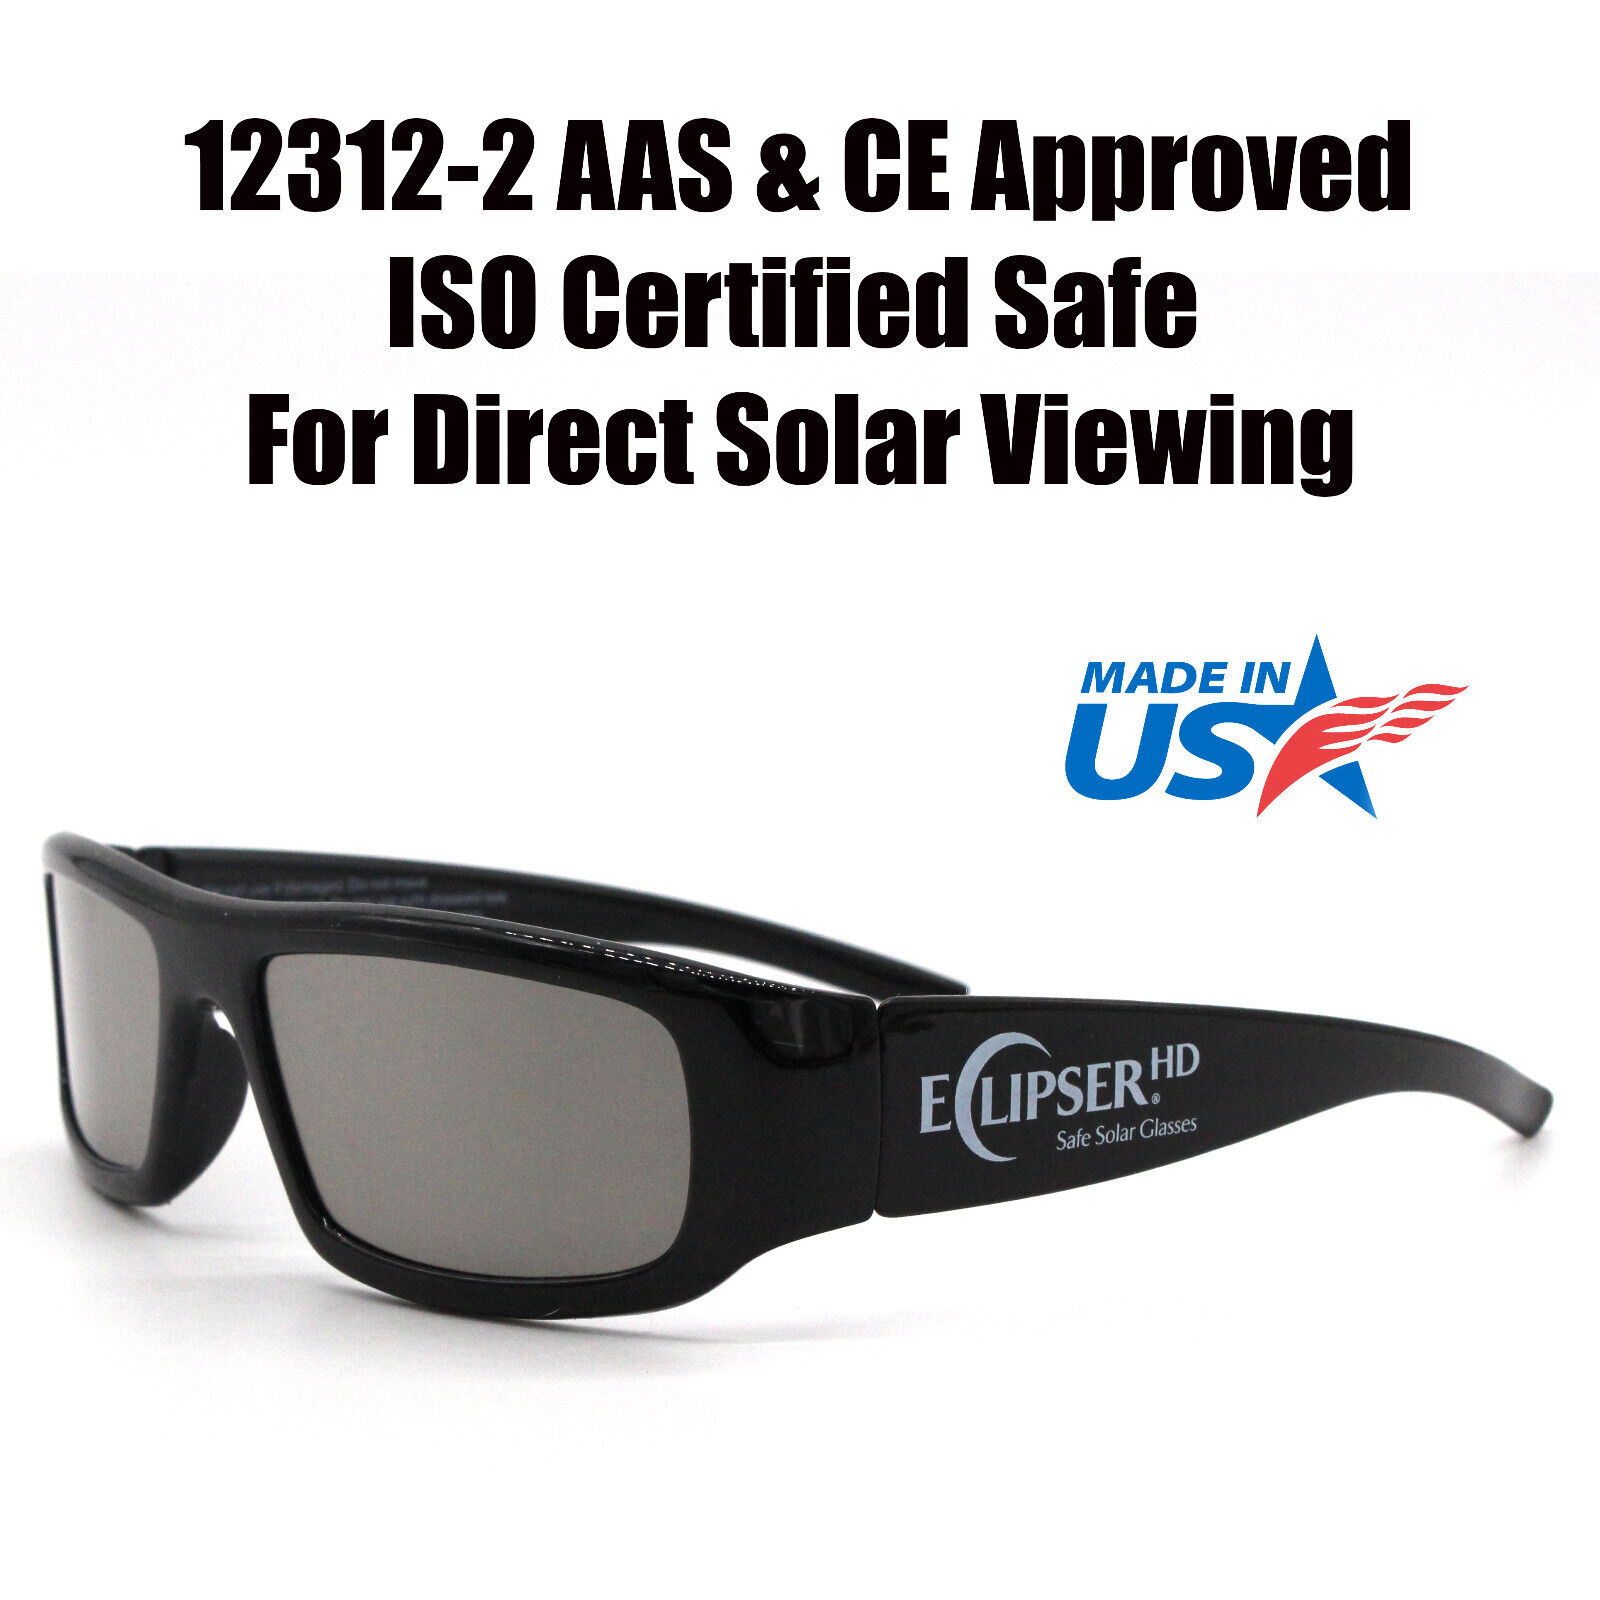 Solar Eclipse Glasses Plastic Frame ISO Certified Safe Made in the USA